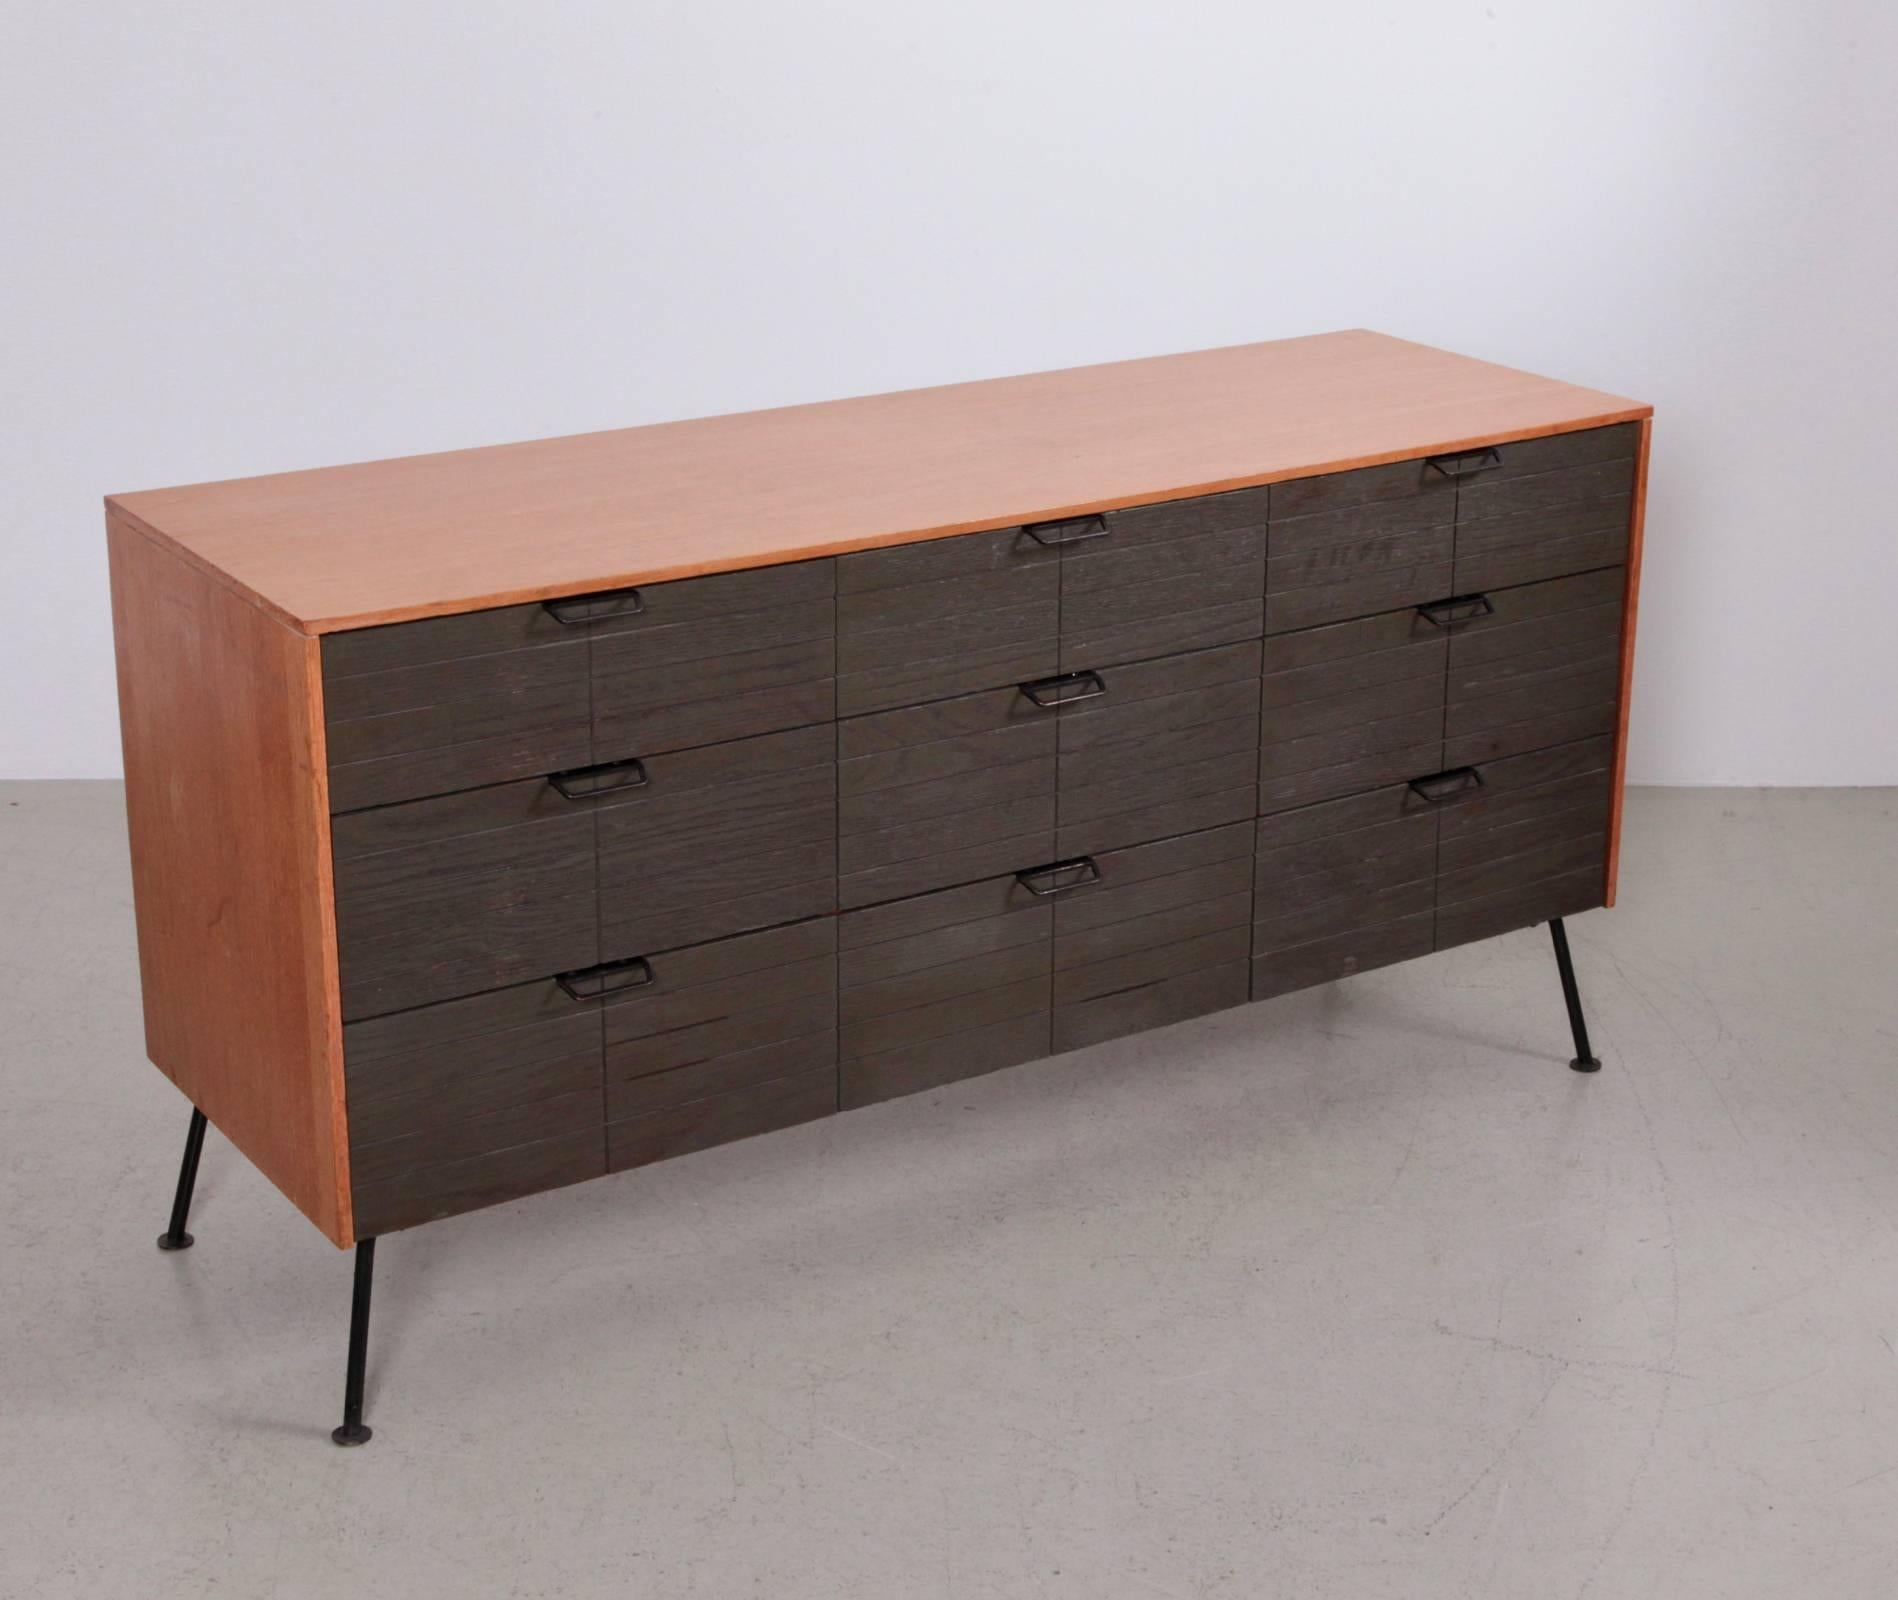 Mid-20th Century Dresser by Raymond Loewy for Mengel Furniture Company